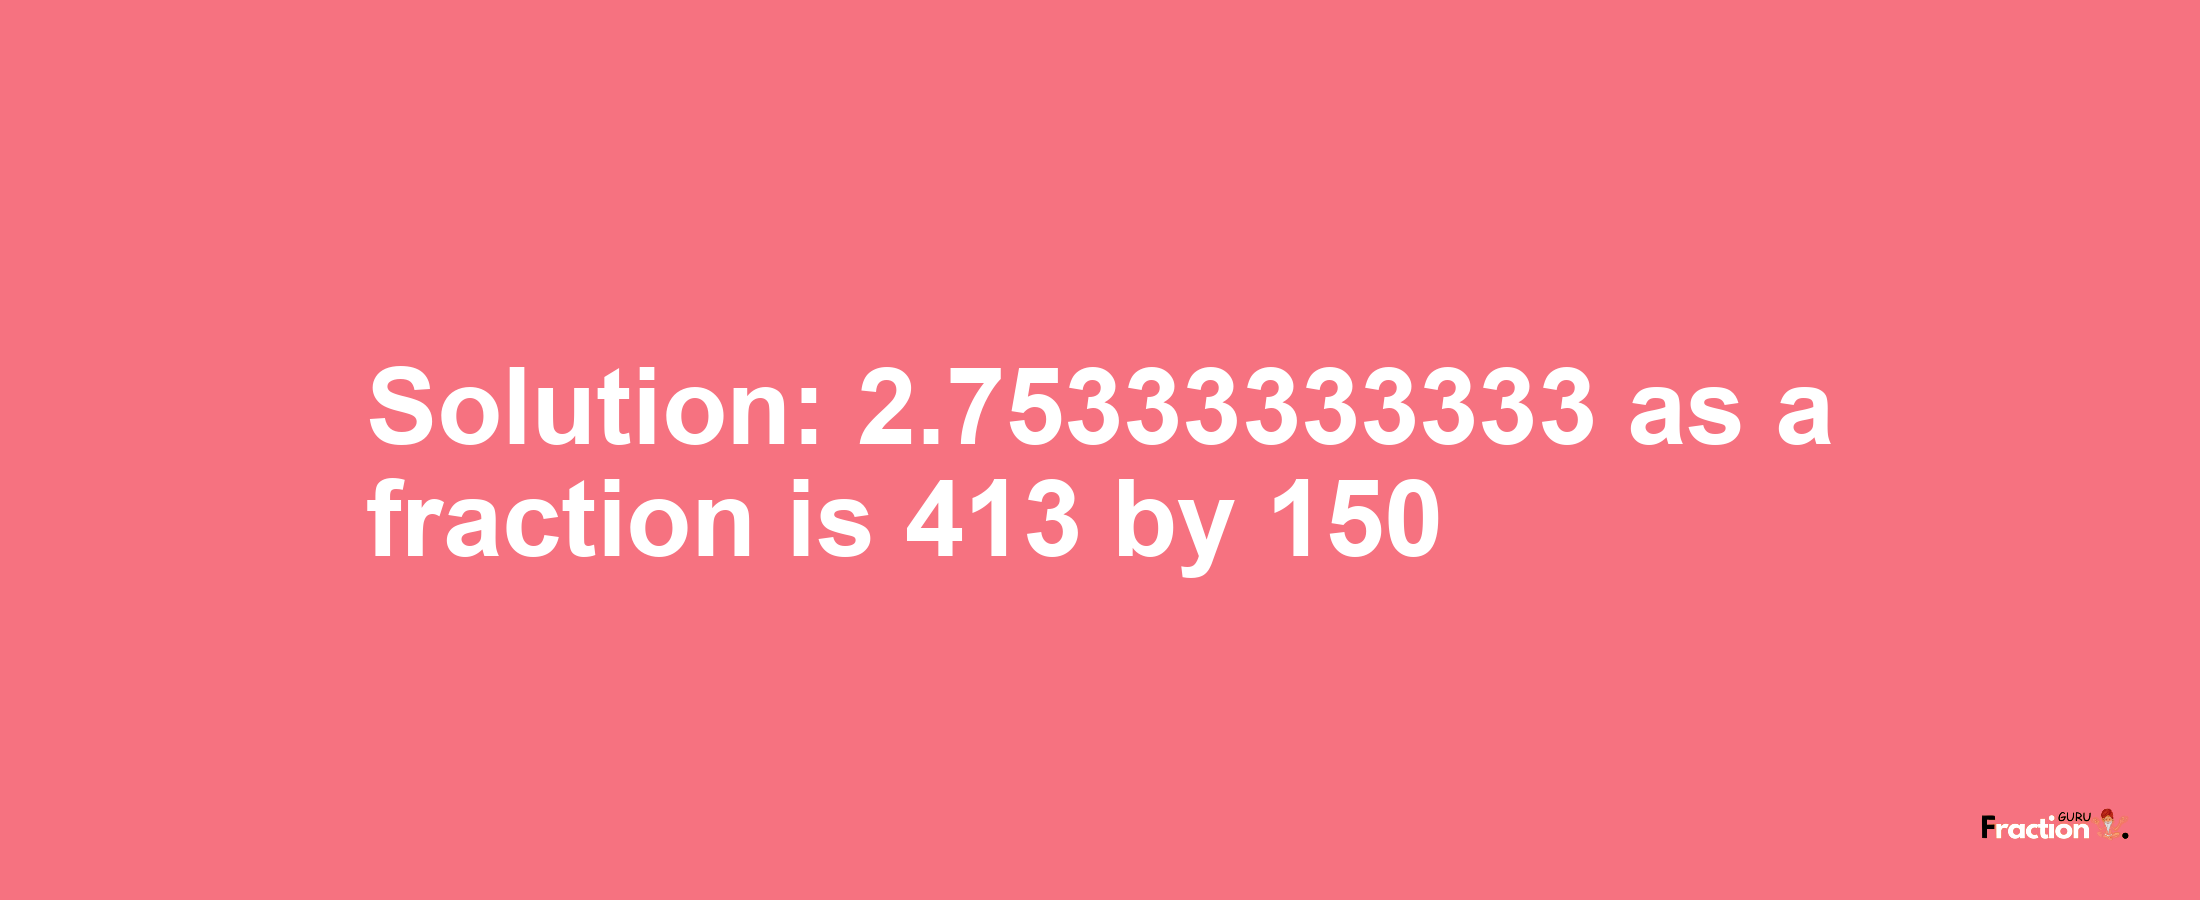 Solution:2.75333333333 as a fraction is 413/150